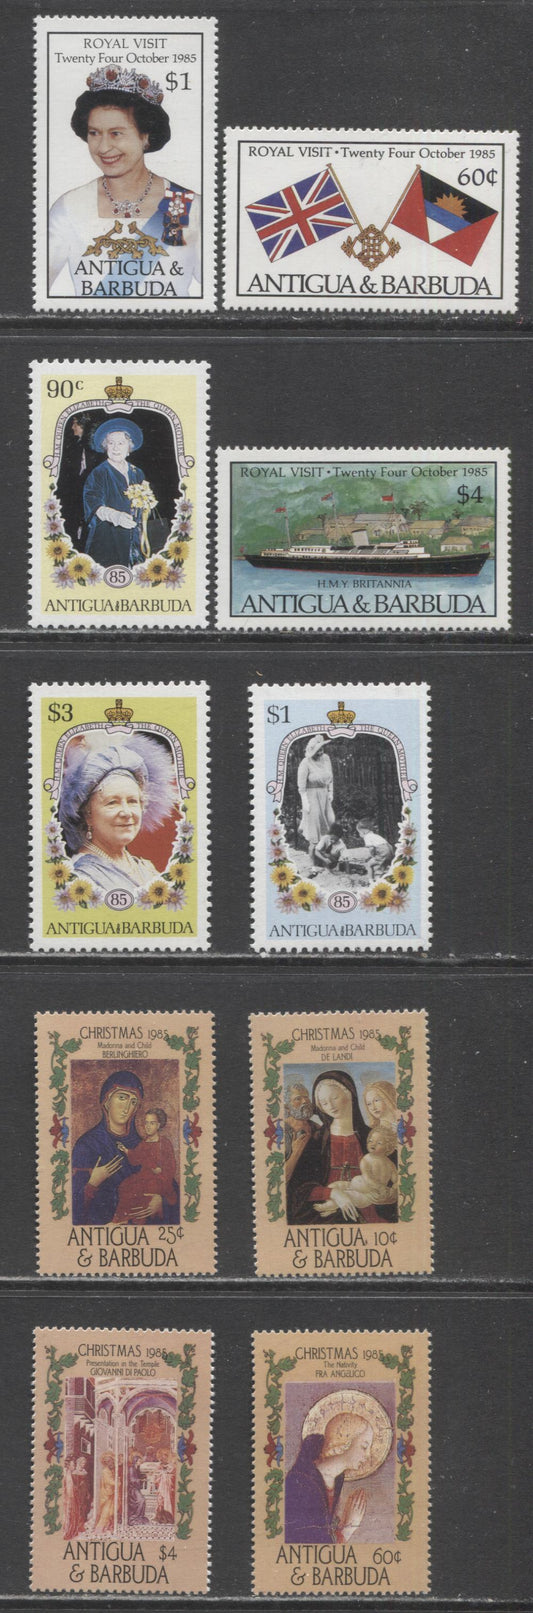 Lot 136 Antigua SC#866A/908 1985 State Visit Of Elizabeth II, Queen Mother 85th Birthday & Christmas Issues, 10 VFNH Singles, Click on Listing to See ALL Pictures, 2017 Scott Cat. $14.85